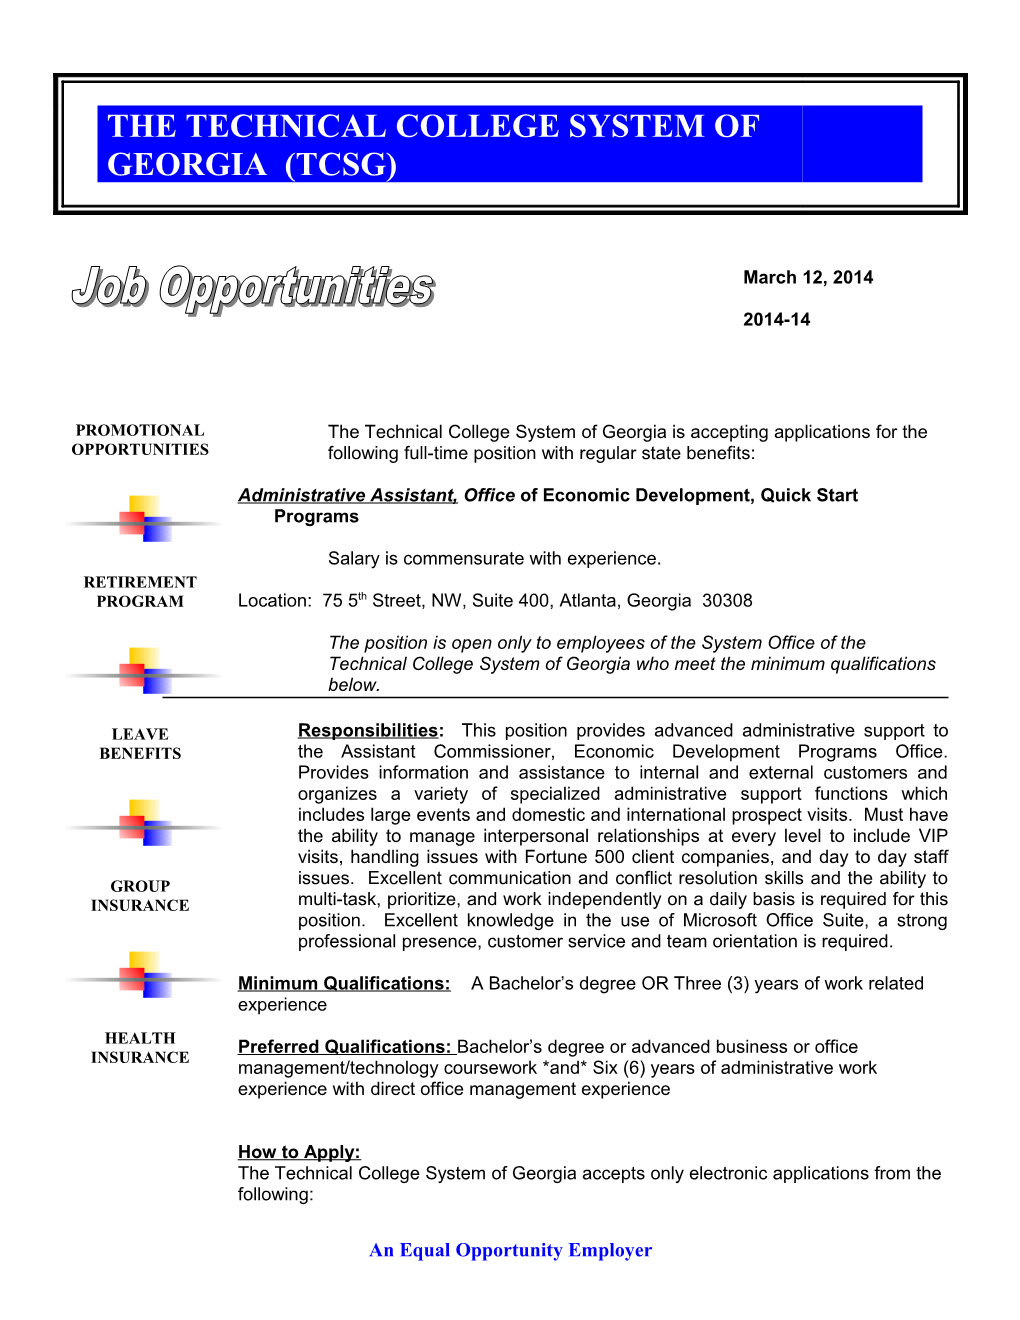 Georgia Department of Technical and Adult Education s3